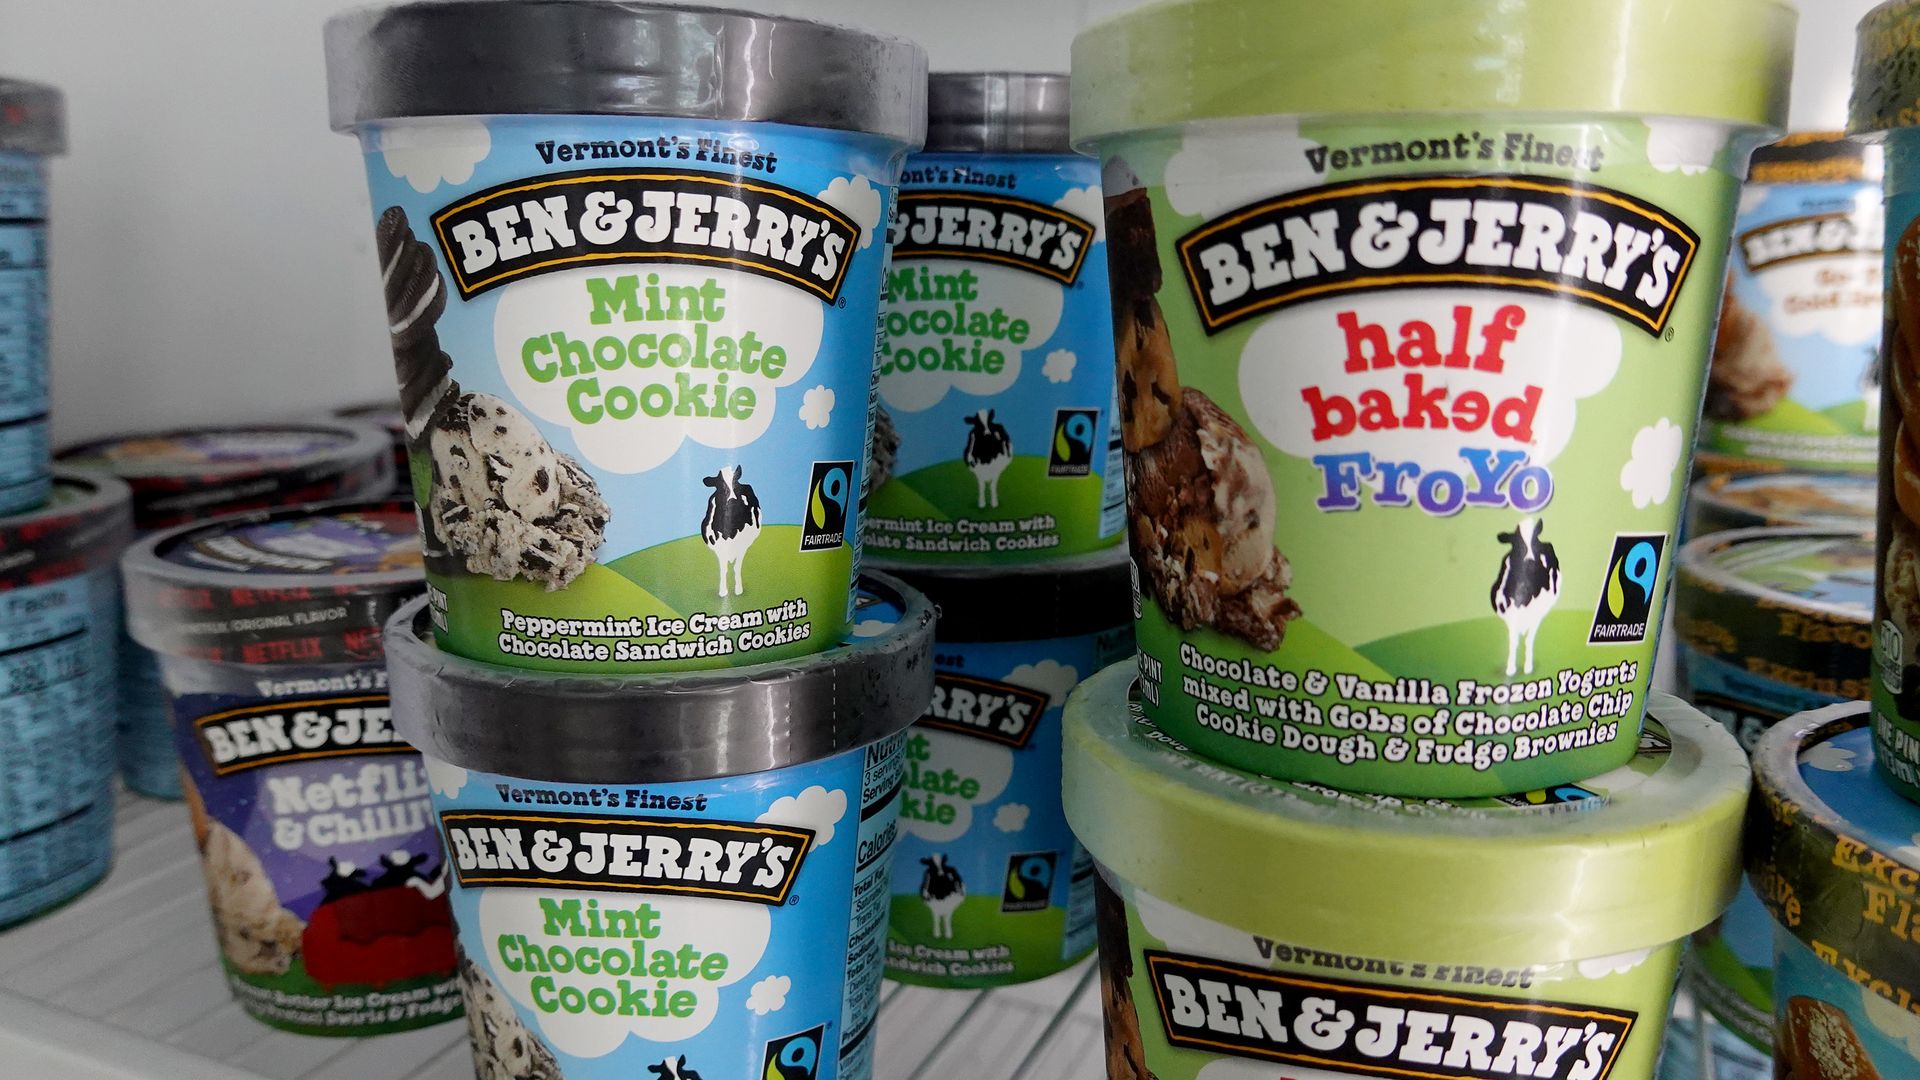 Ben & Jerry's ice cream at the store.